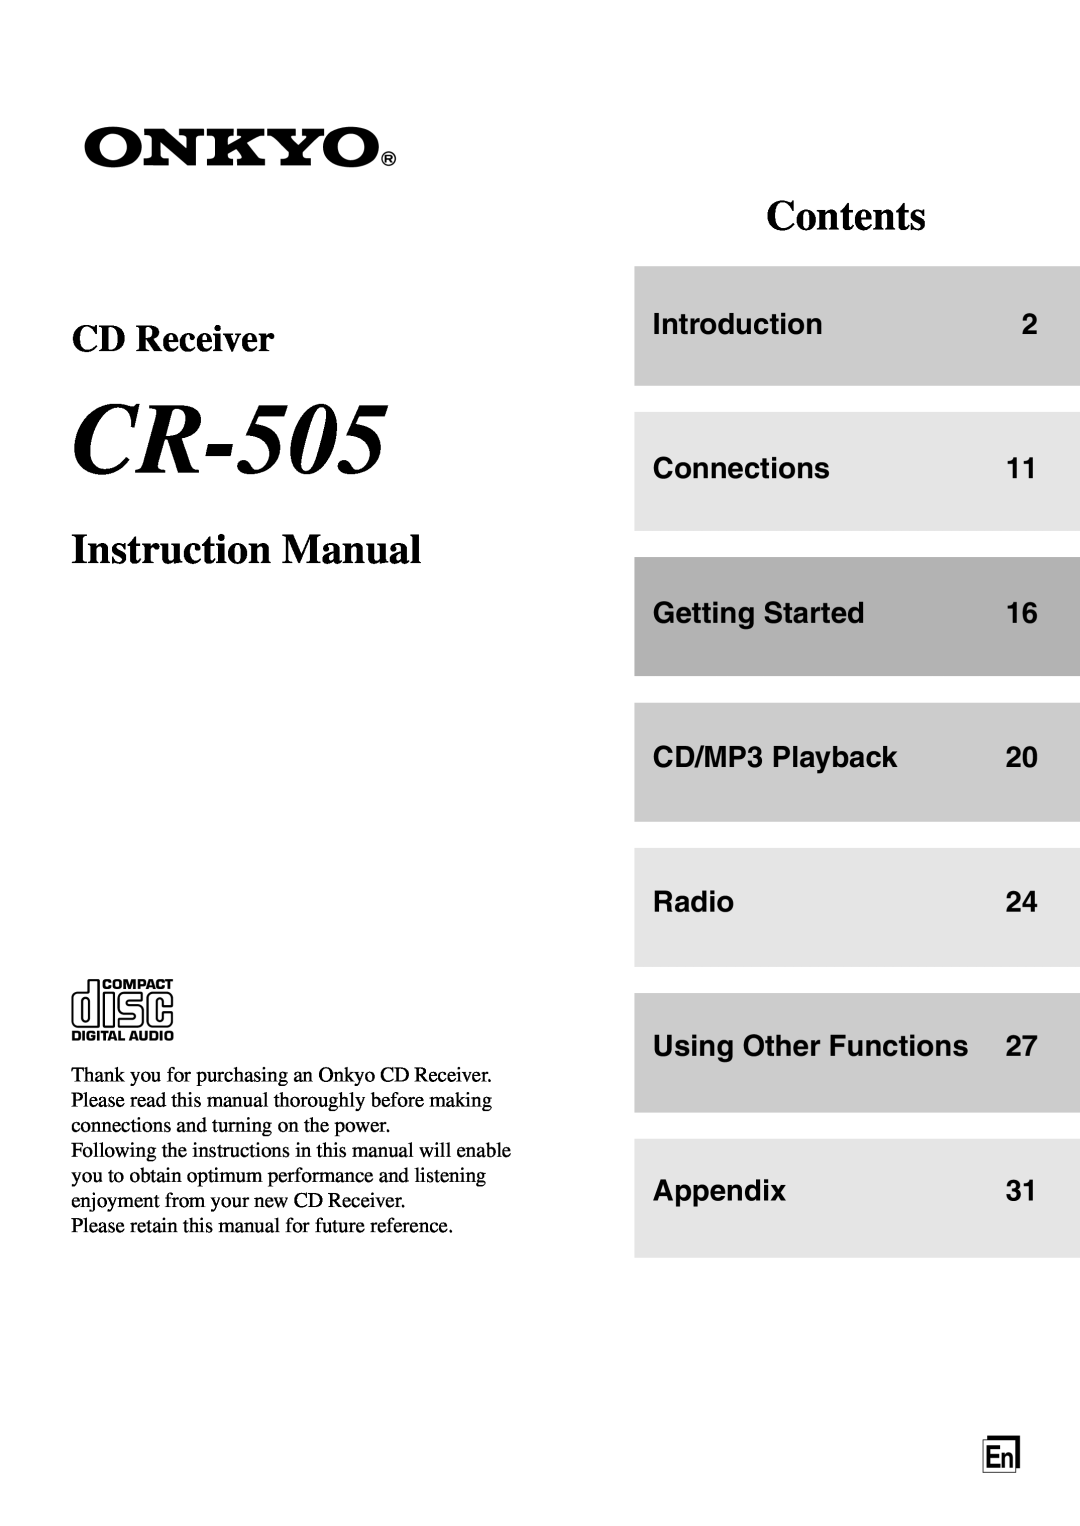 Onkyo CR-505 instruction manual Introduction2 Connections11, Getting Started, CD/MP3 Playback, Contents, CD Receiver 